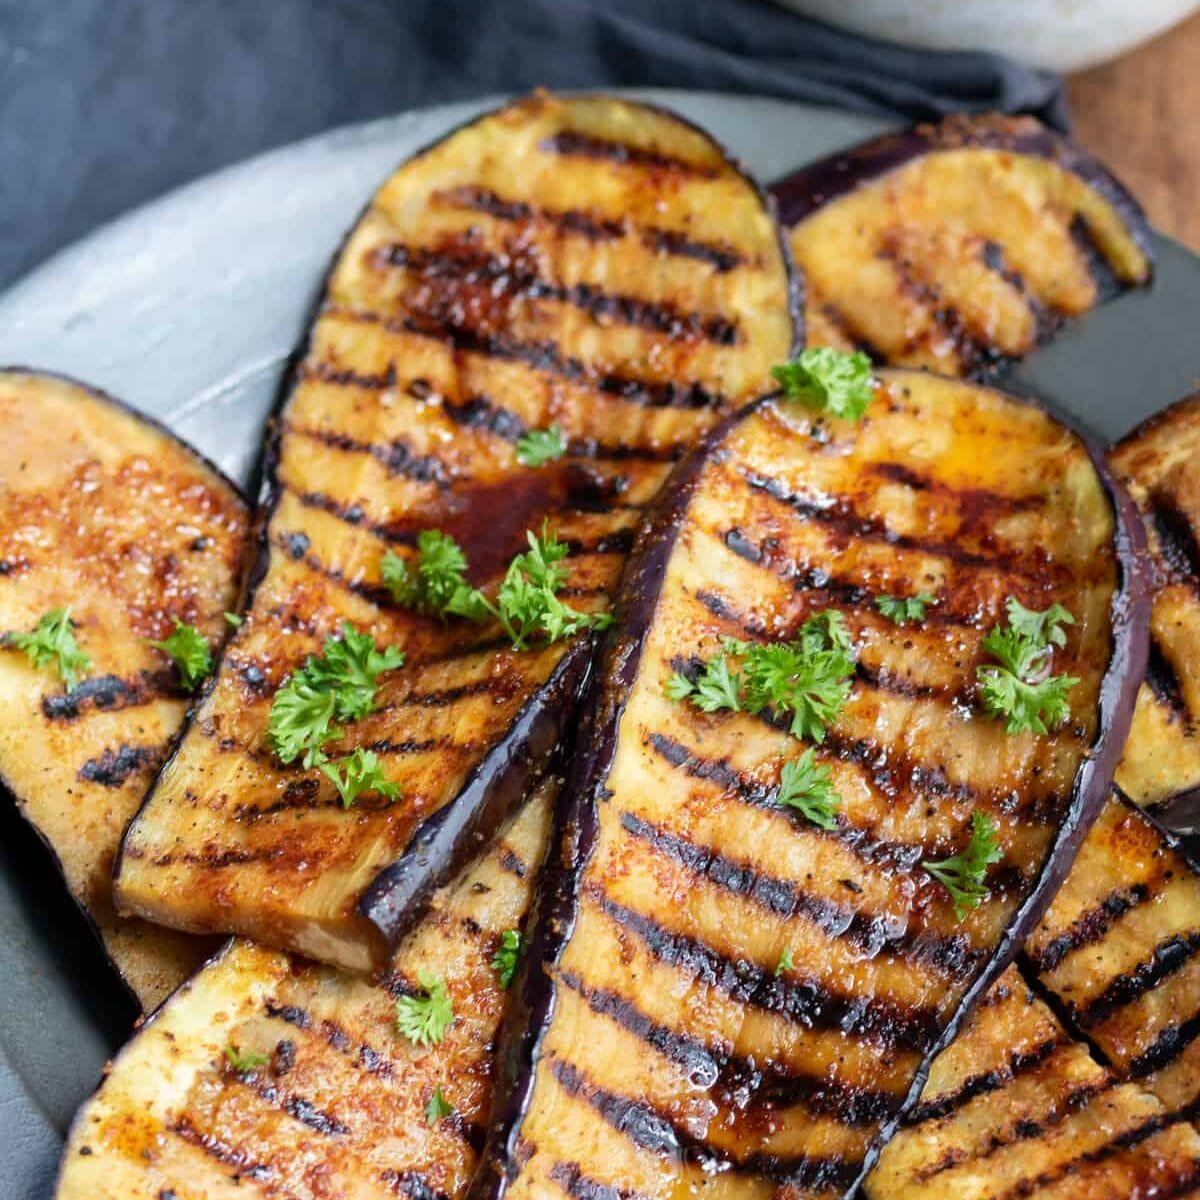 a plate of smokey grilled eggplant steaks with grill marks and topped with chopped parsley